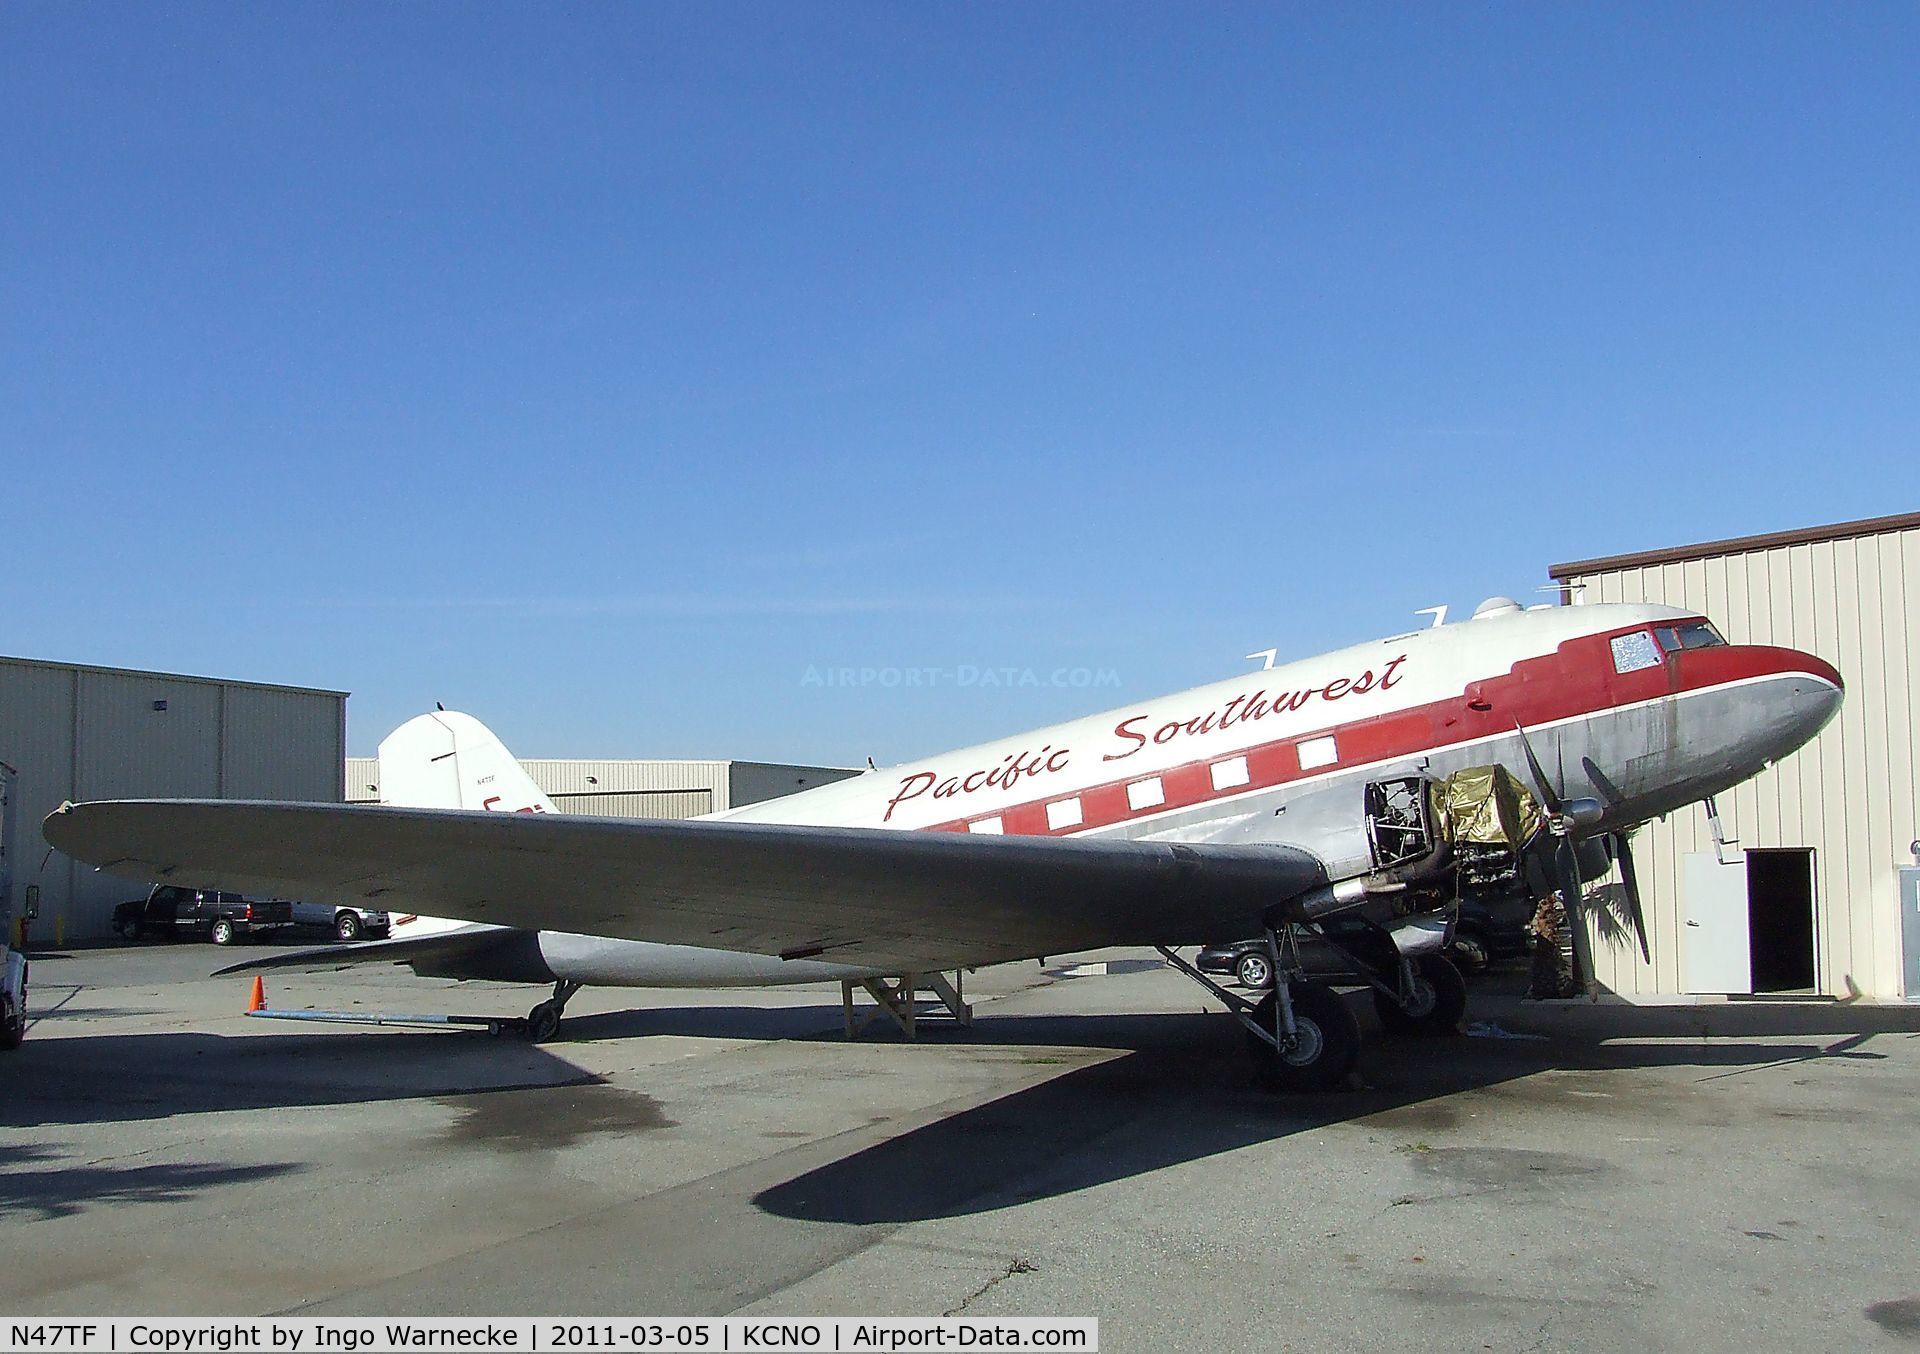 N47TF, 1943 Douglas DC3C (C-47A-5-DK) C/N 12317, Douglas DC-3C at the Planes of Fame Museum, Chino CA